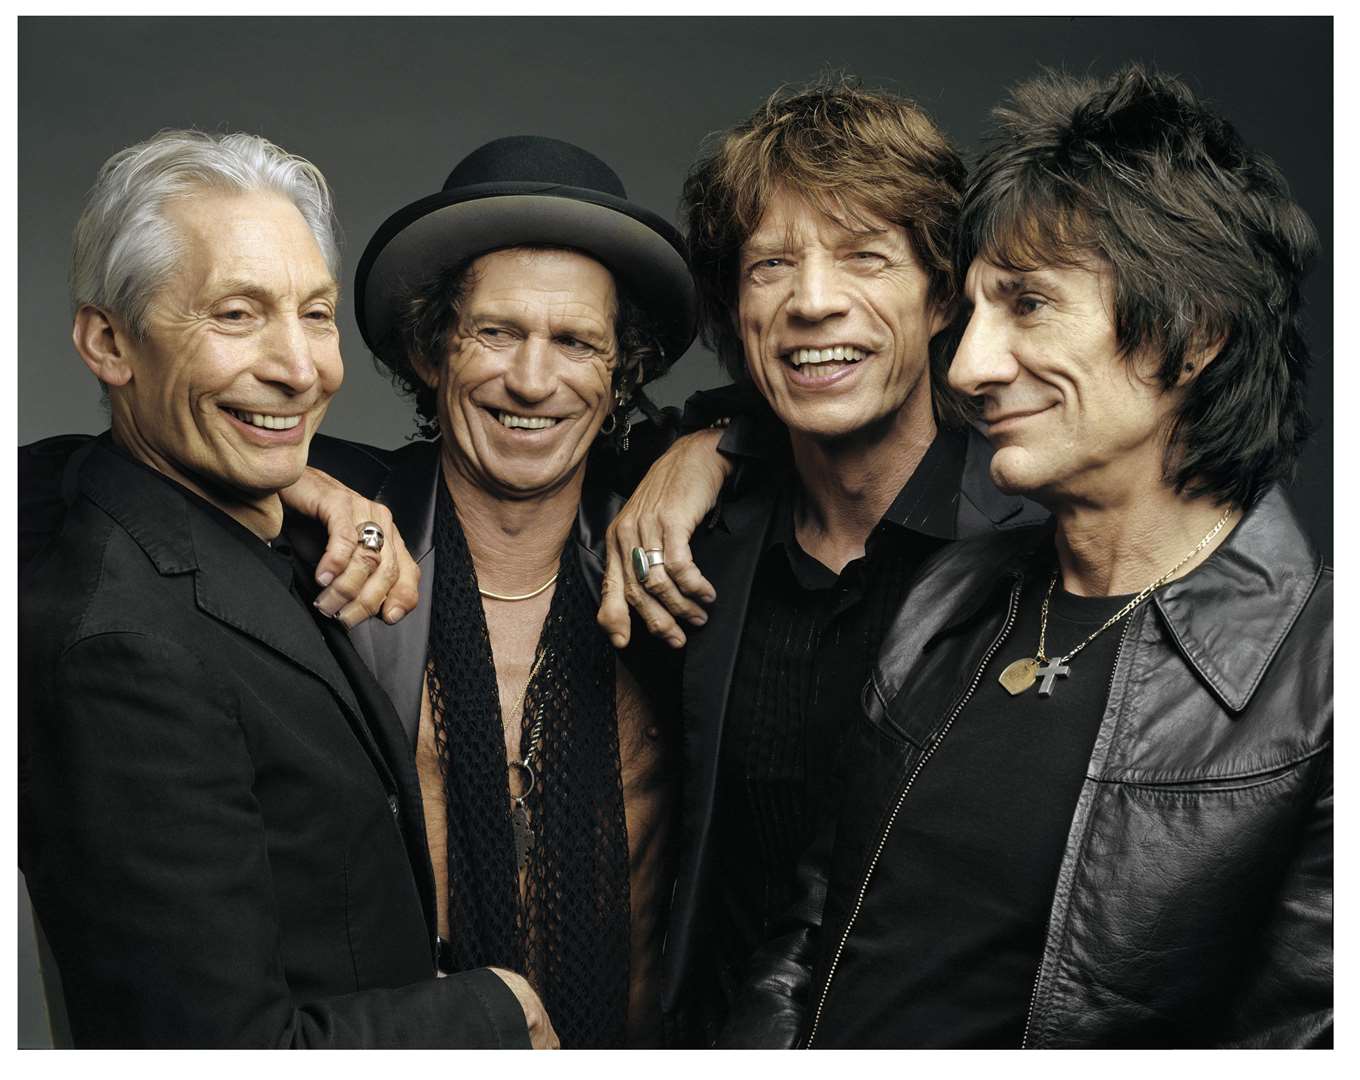 The Rolling Stones were fans of the Vox equipment Picture: Rebecca Gibbs